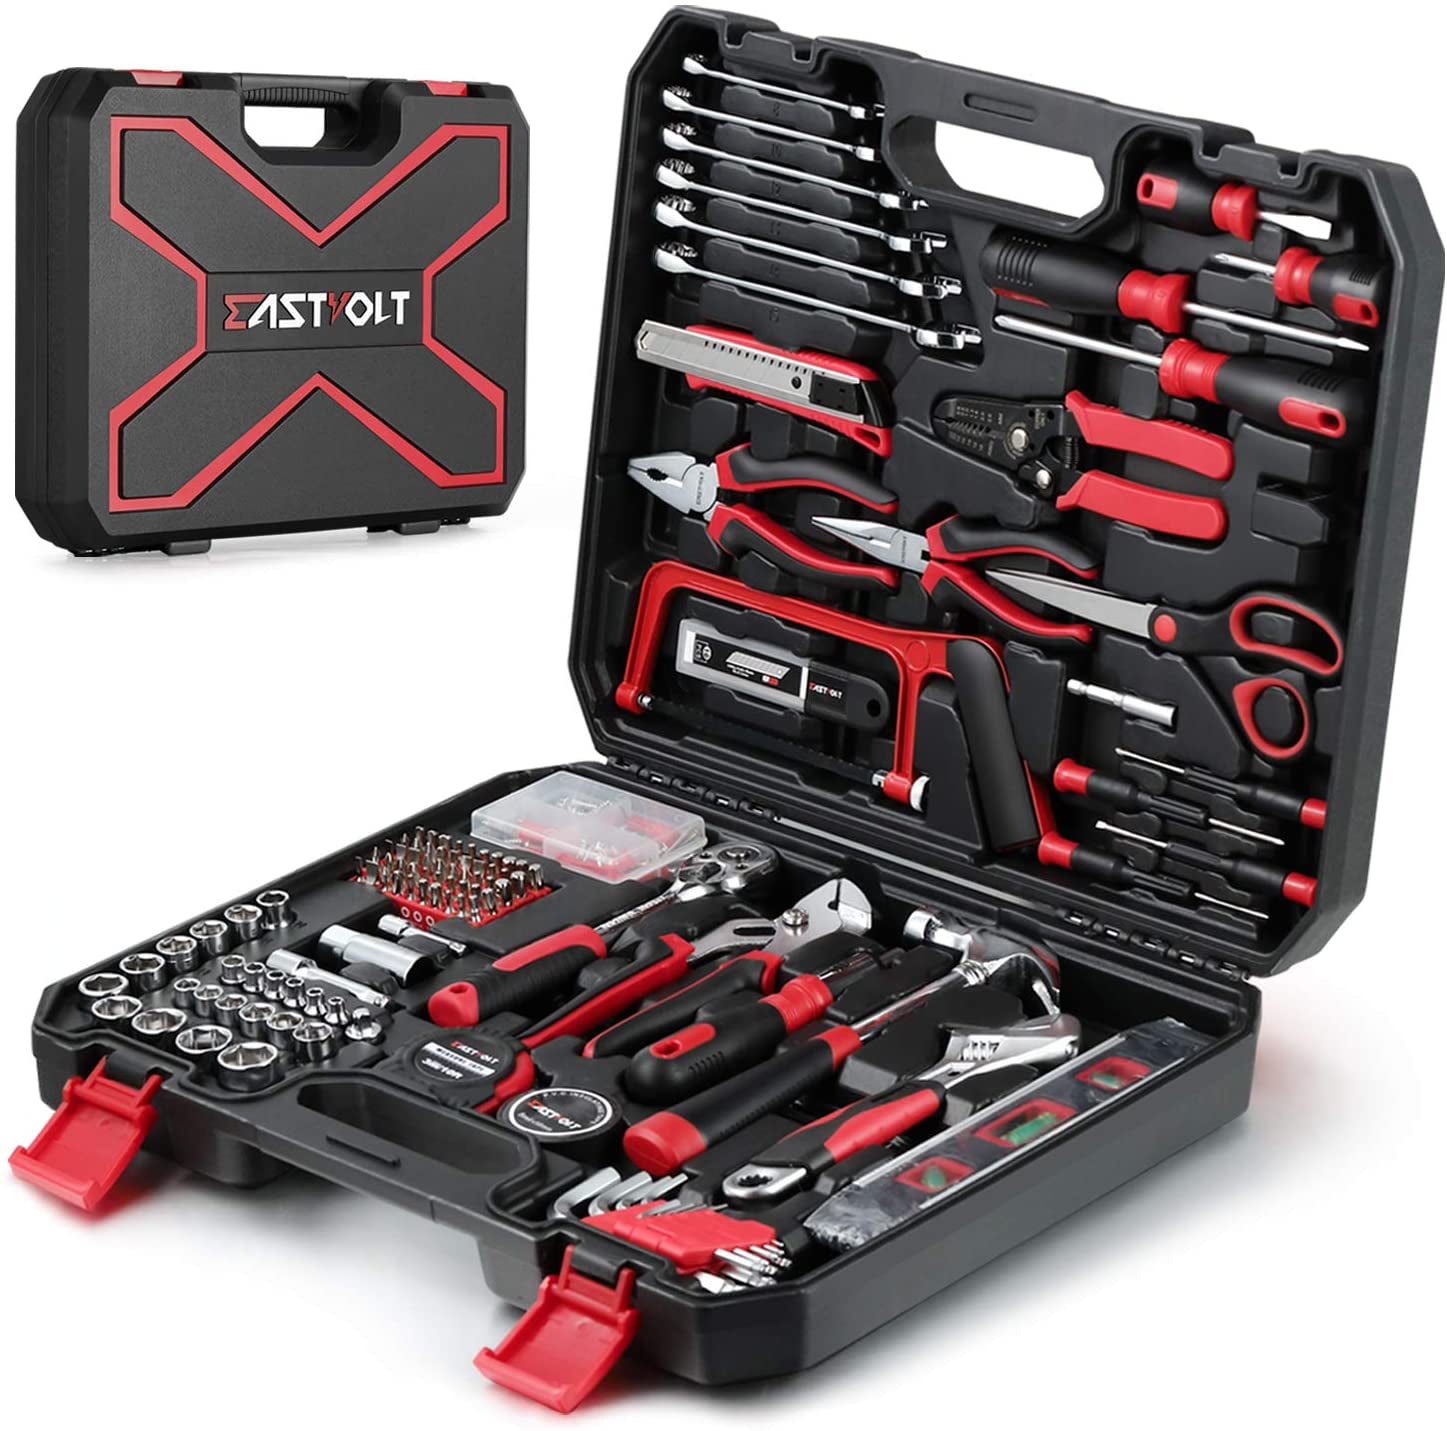 Eastvolt, Eastvolt 218-Piece Household Tool Kit, Auto Repair Tool Set, Tool Kits for Homeowner, General Household Hand Tool Set with Hammer, Plier, Screwdriver Set, Socket Kit and Toolbox Storage Case.